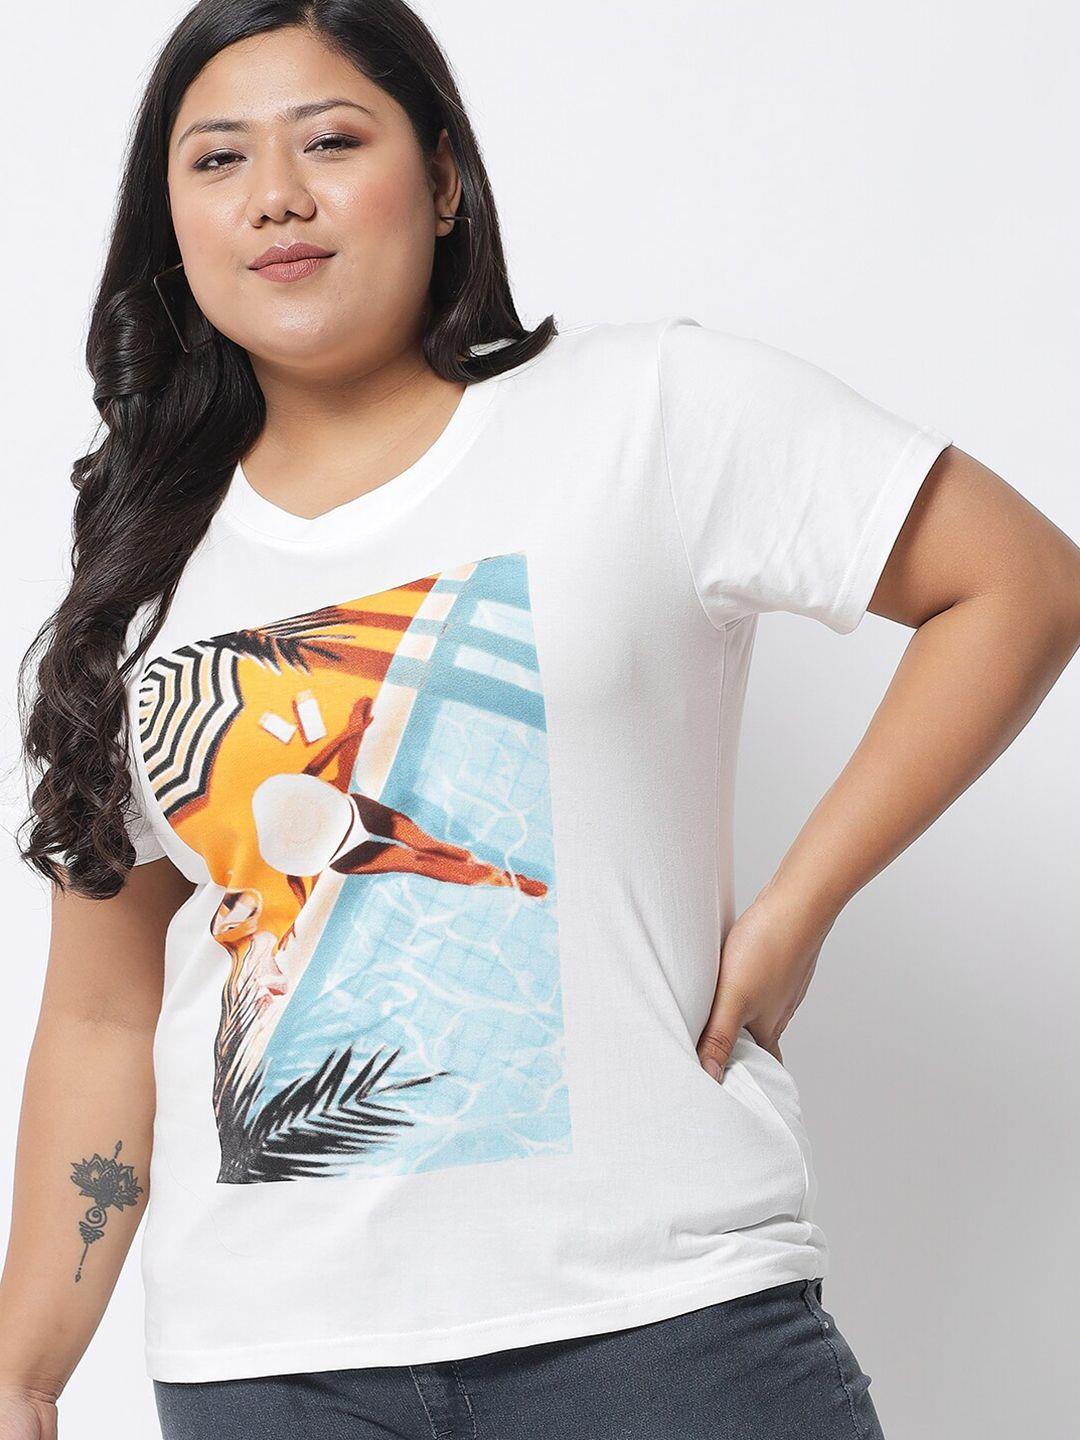 beyound size - the dry state women plus size off white & blue printed cotton t-shirt